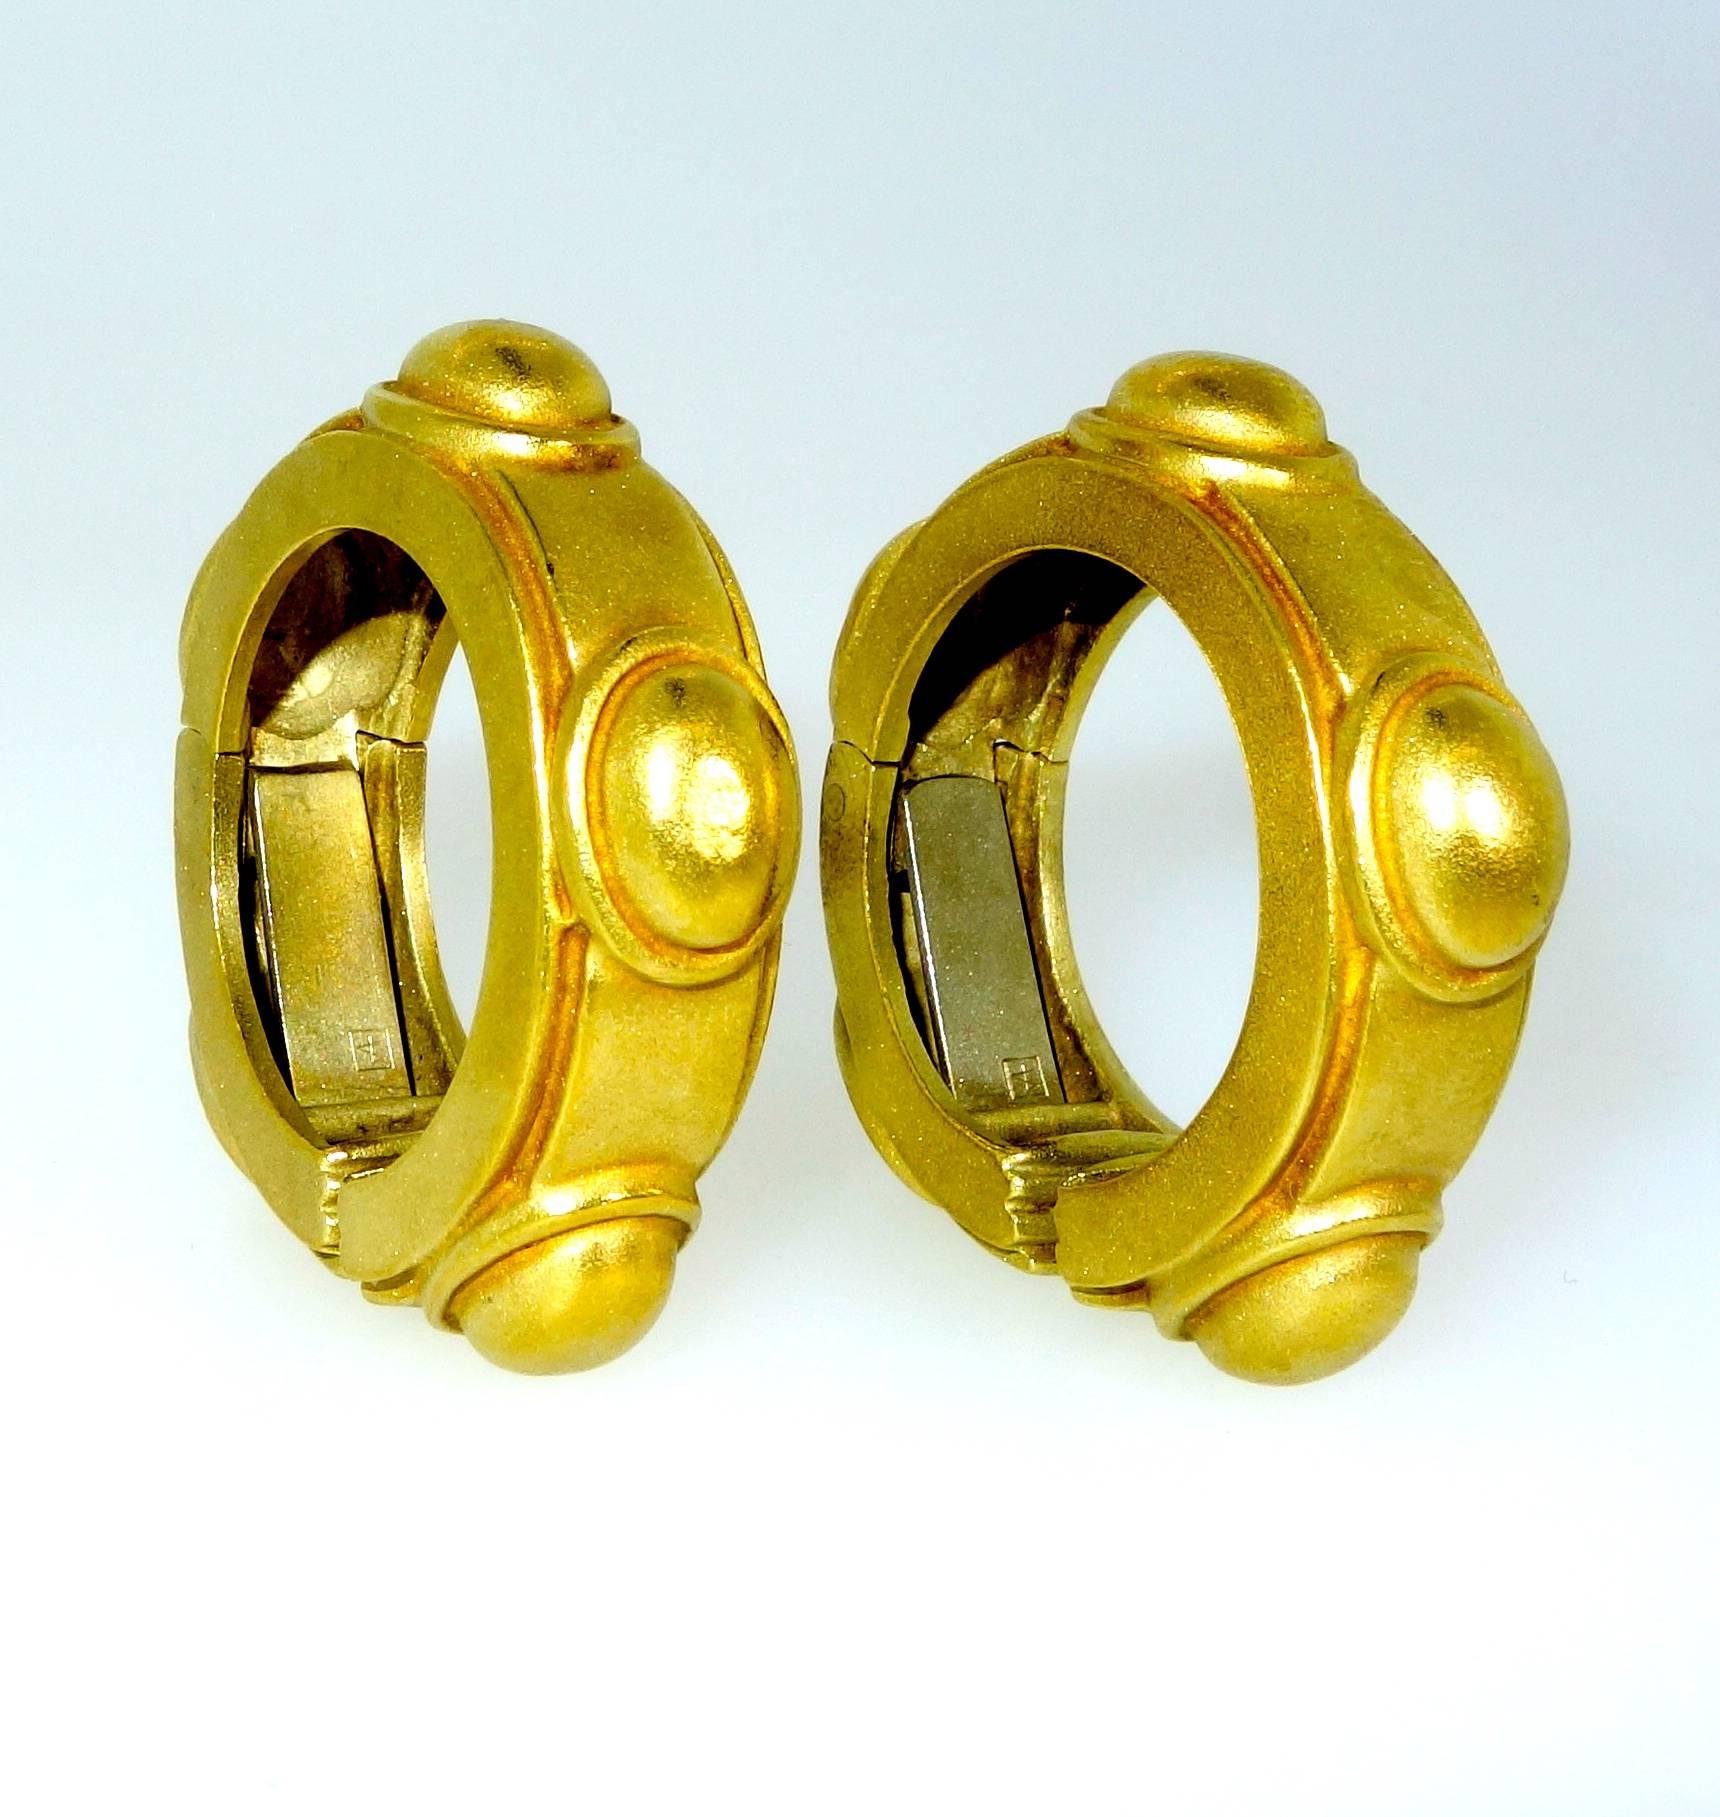 18K green gold stylized hoops.  Substantial in feel and well balanced for comfort on the ear, these unusual earrings, models we have not encountered previously, are now clip on and can be altered for a pierced ear.  1.25 inches in diameter, and 3/8